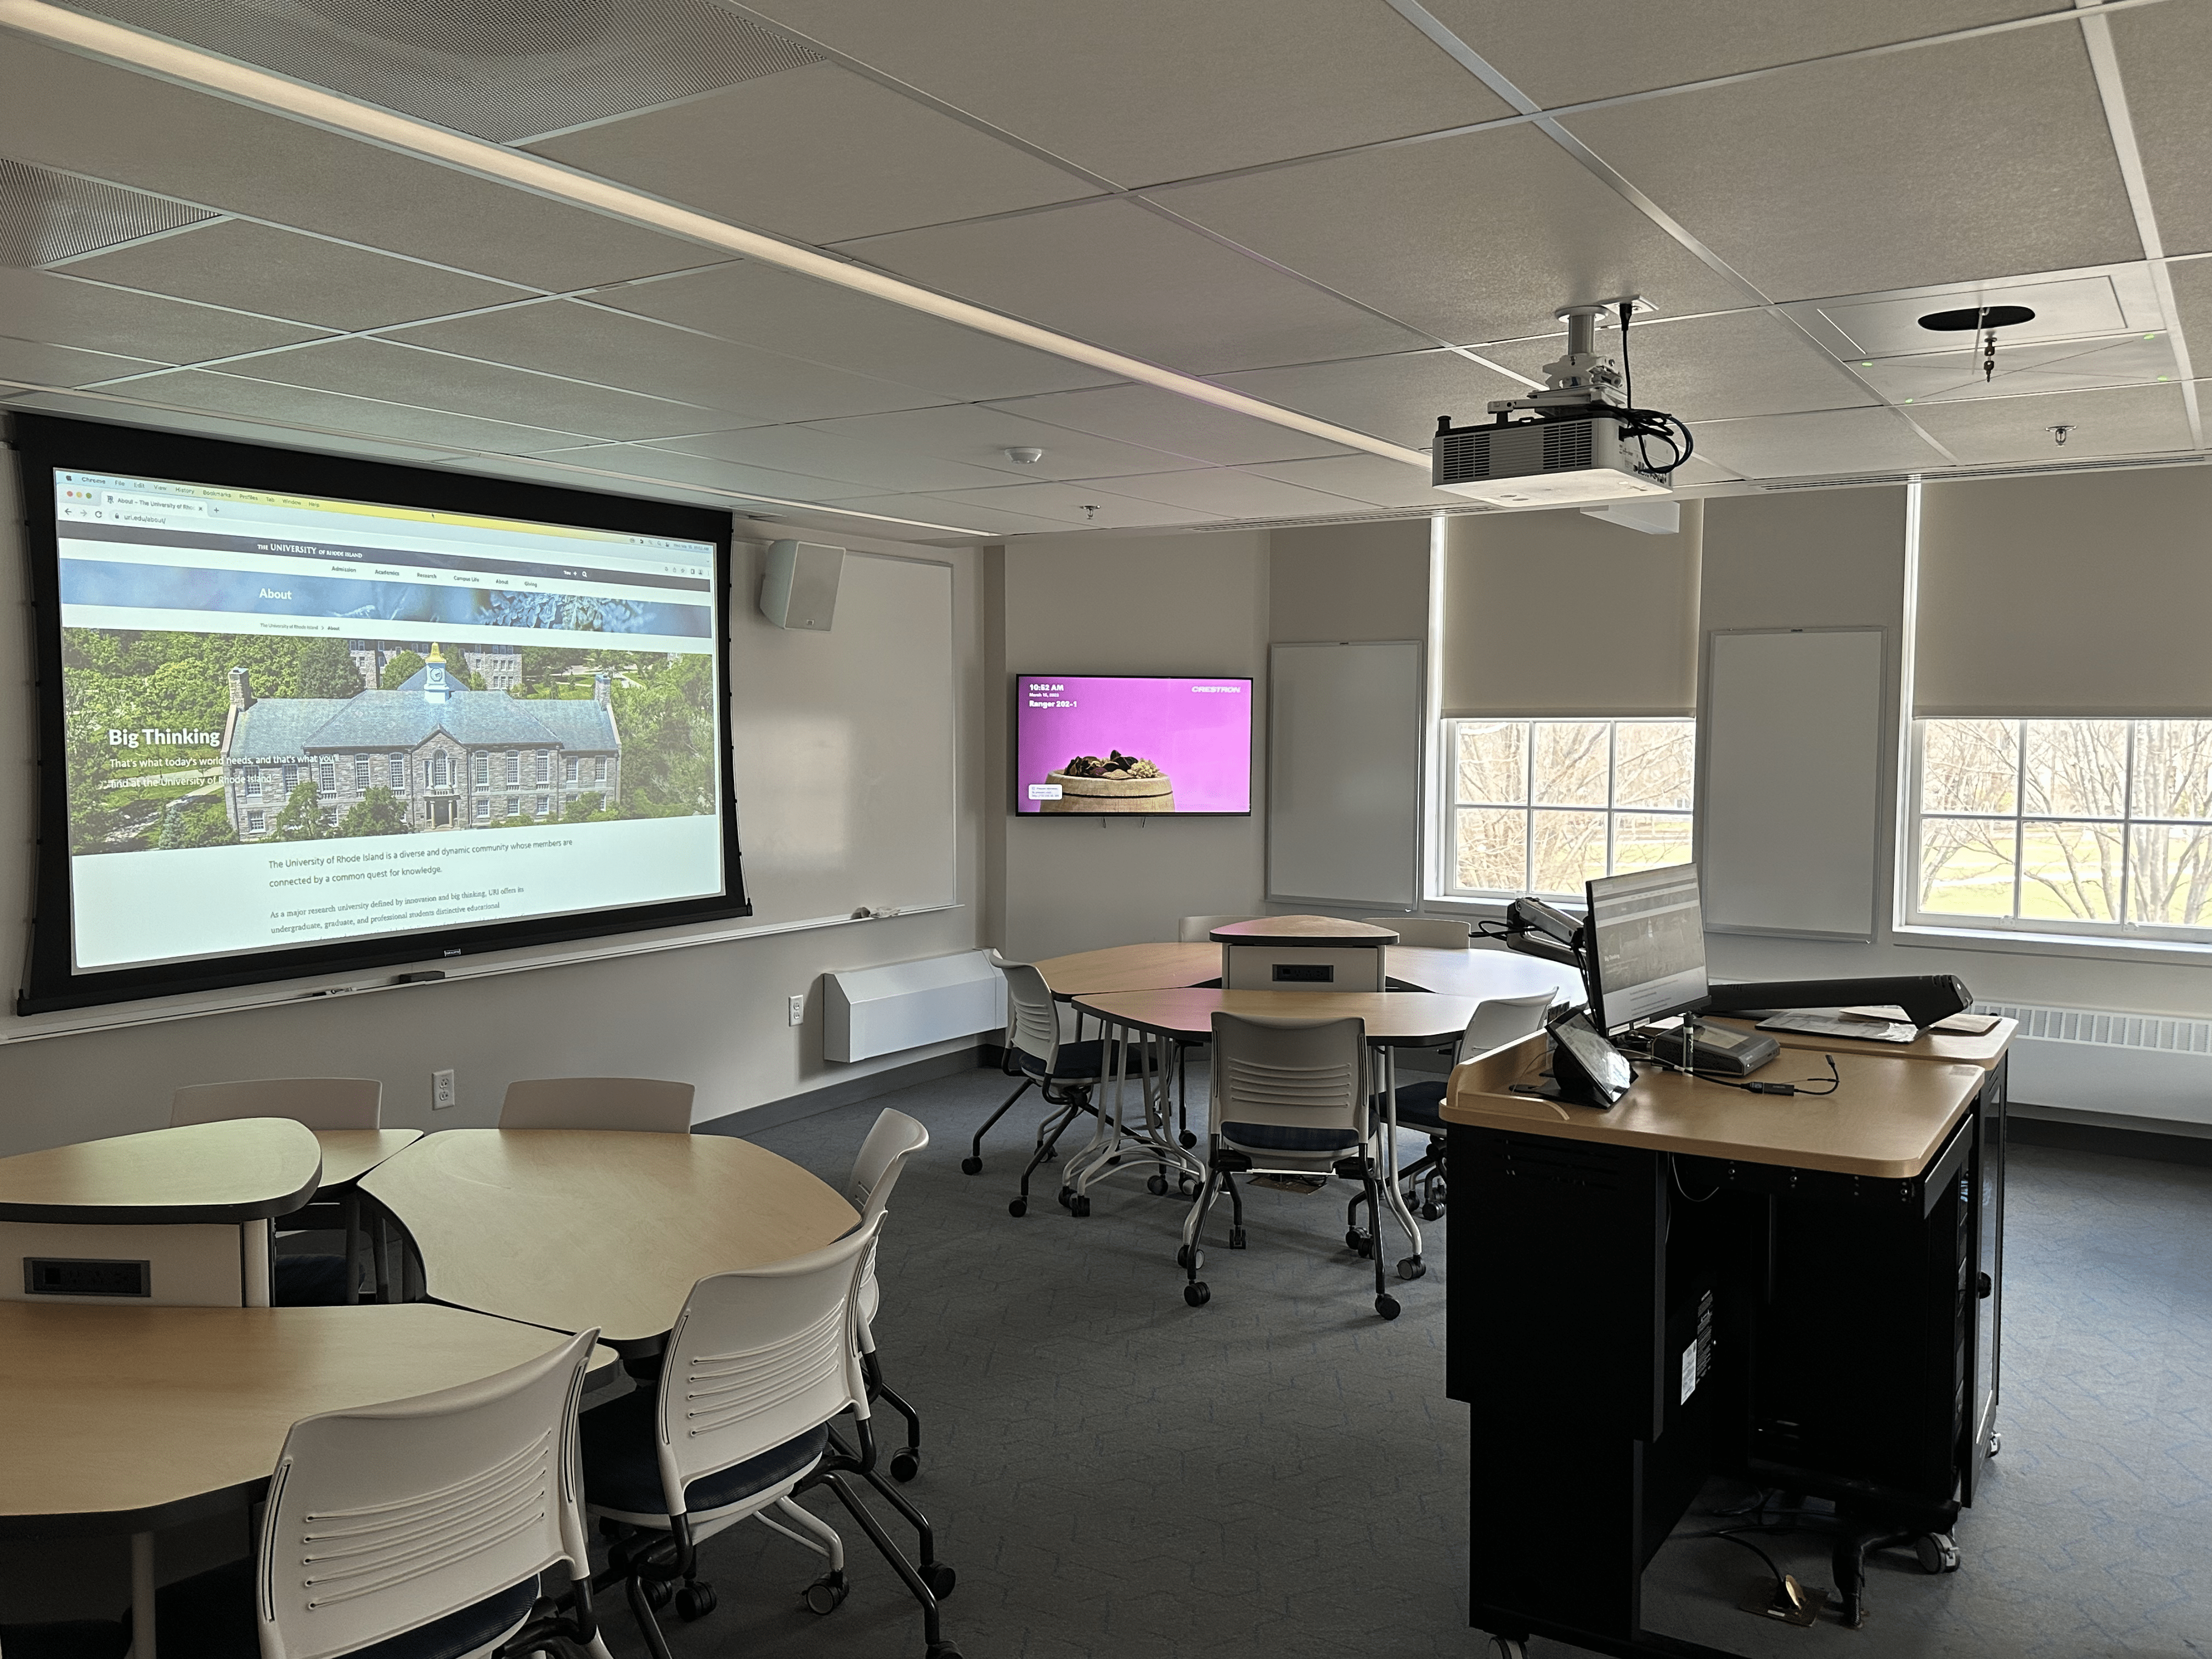 Sony’s Projectors and Displays Help Transform the Visualization of University of Rhode Island’s Curriculum